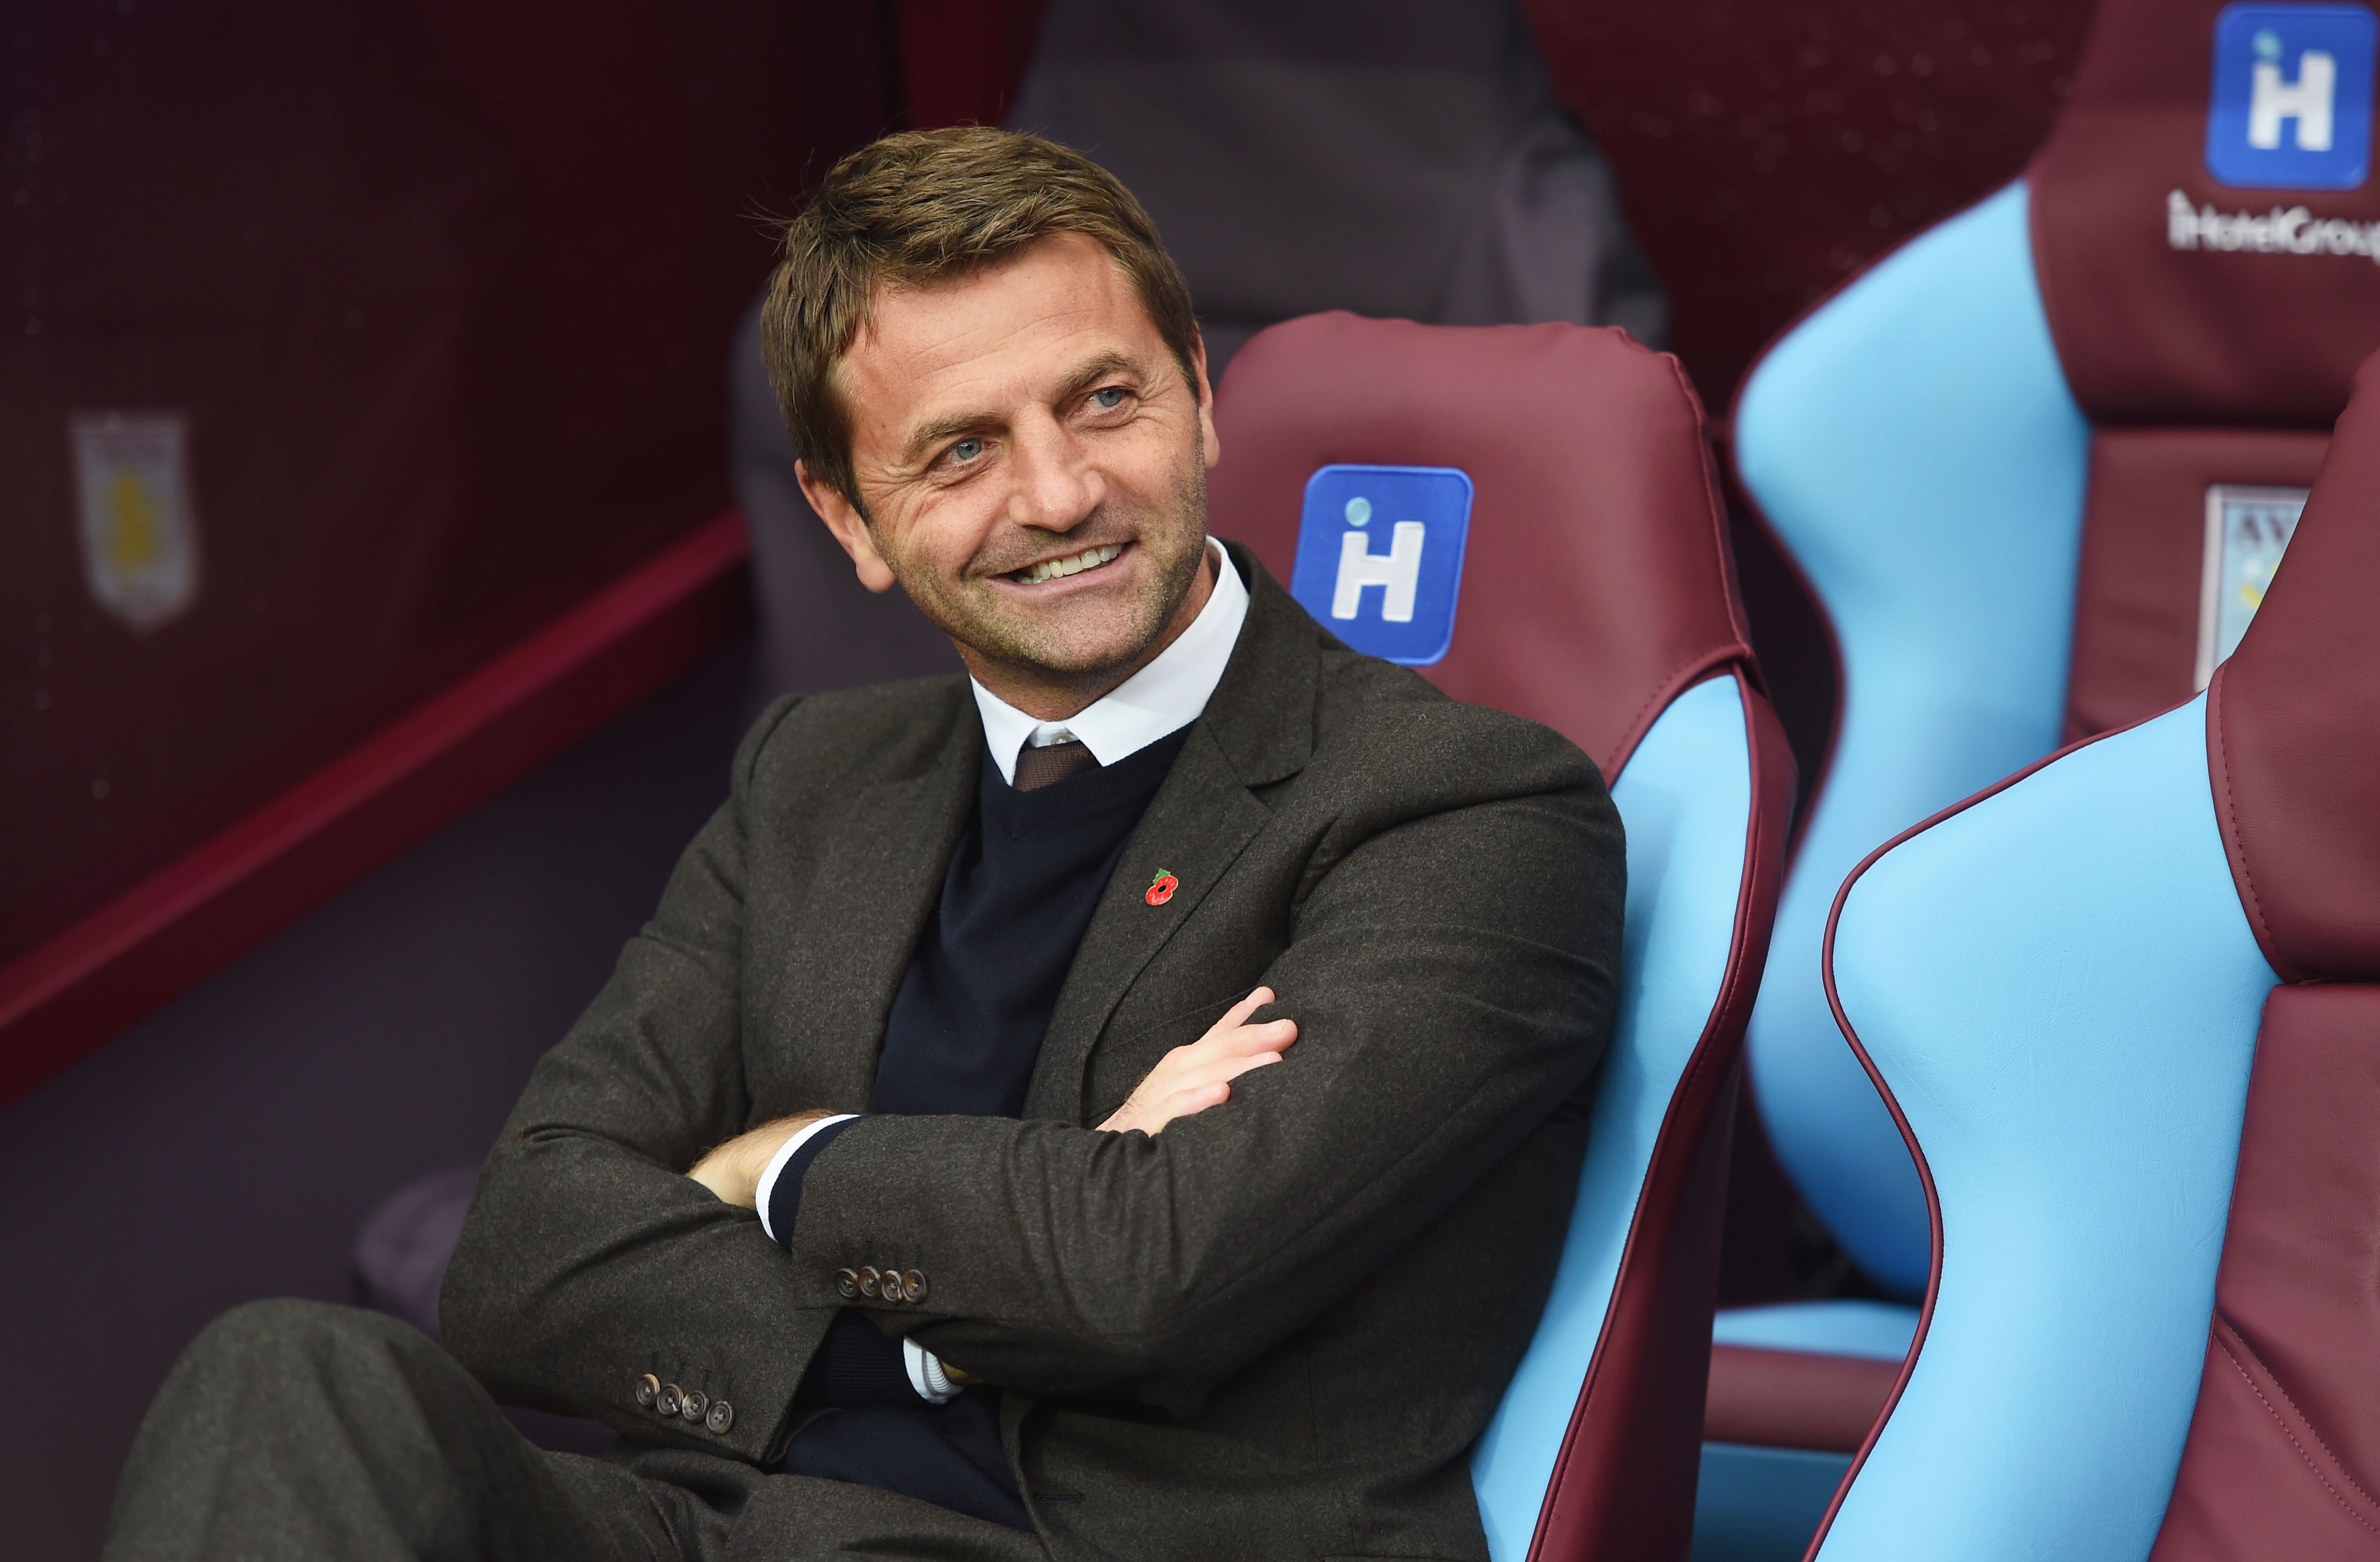 BIRMINGHAM, ENGLAND - OCTOBER 24: Tim Sherwood Manager of Aston Villa looks on prior to the Barclays Premier League match between Aston Villa and Swansea City at Villa Park on October 24, 2015 in Birmingham, England. (Photo by Michael Regan/Getty Images)